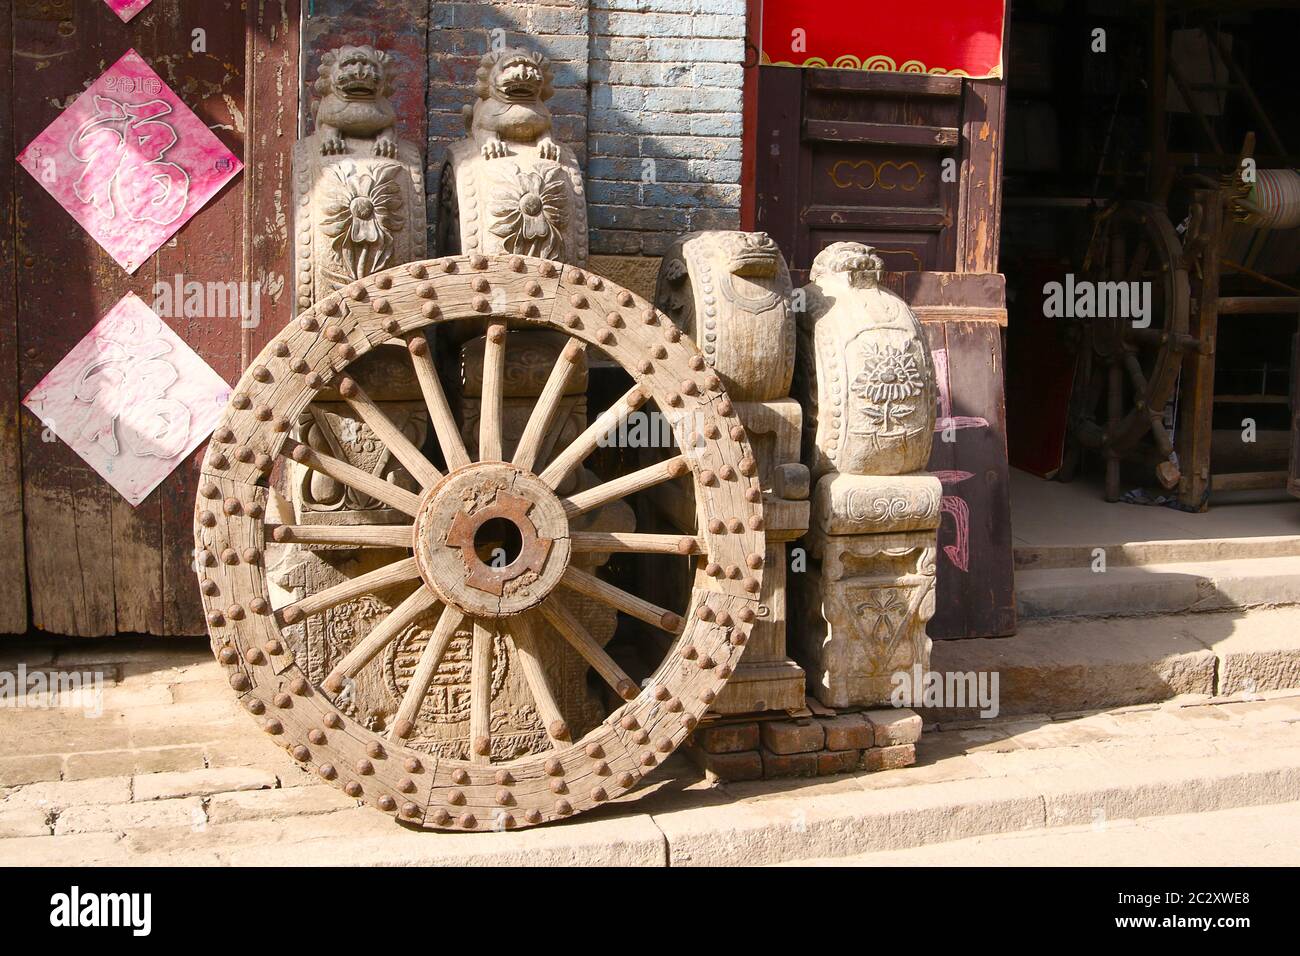 Image showing an antique metal studded wooden wheel and some sculptures and furniture outside an antique shop, Zhou Cun, Shandong Province, China Stock Photo